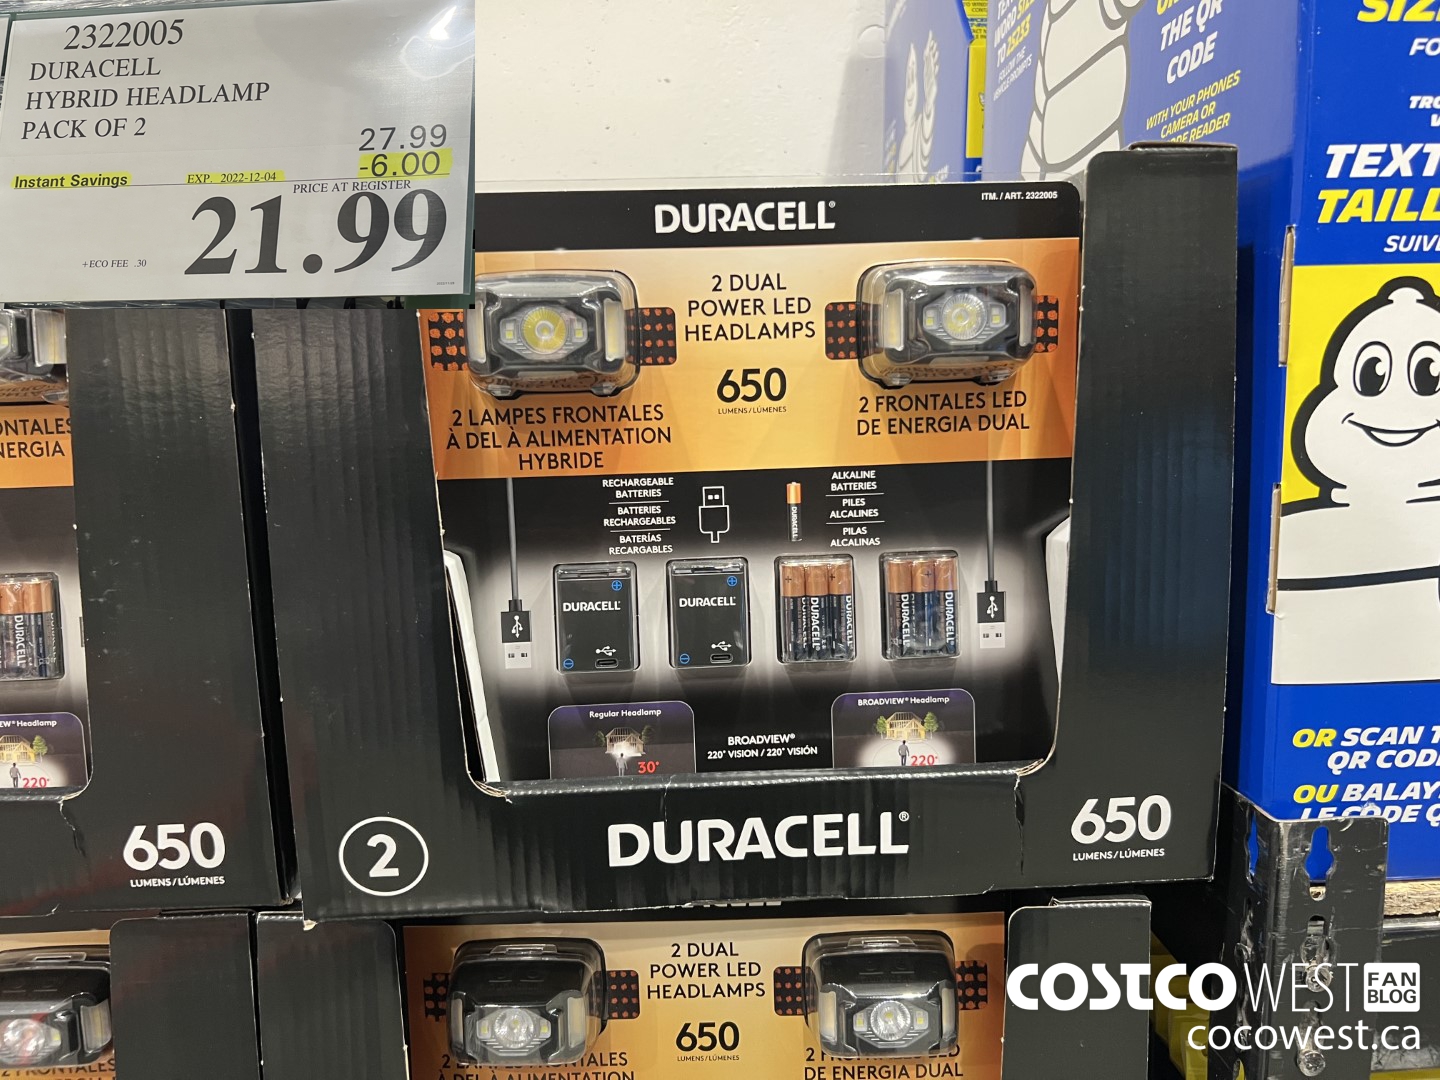 DURACELL HYBRID LANTERN On Sale in COSTCO (Exp. May 14, 2023) #costco 